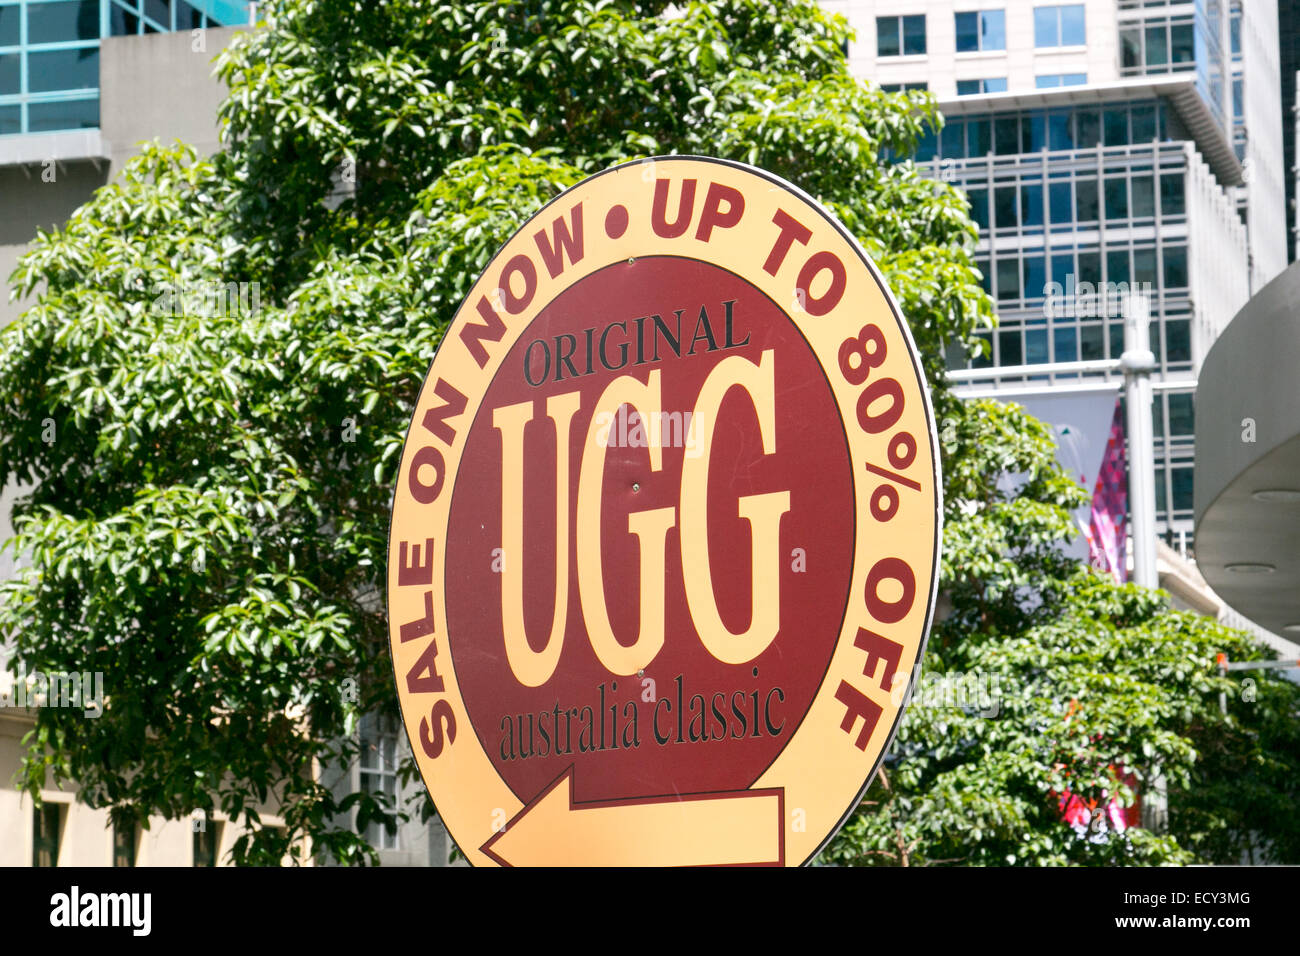 Ugg boots hi-res stock photography and images - Alamy